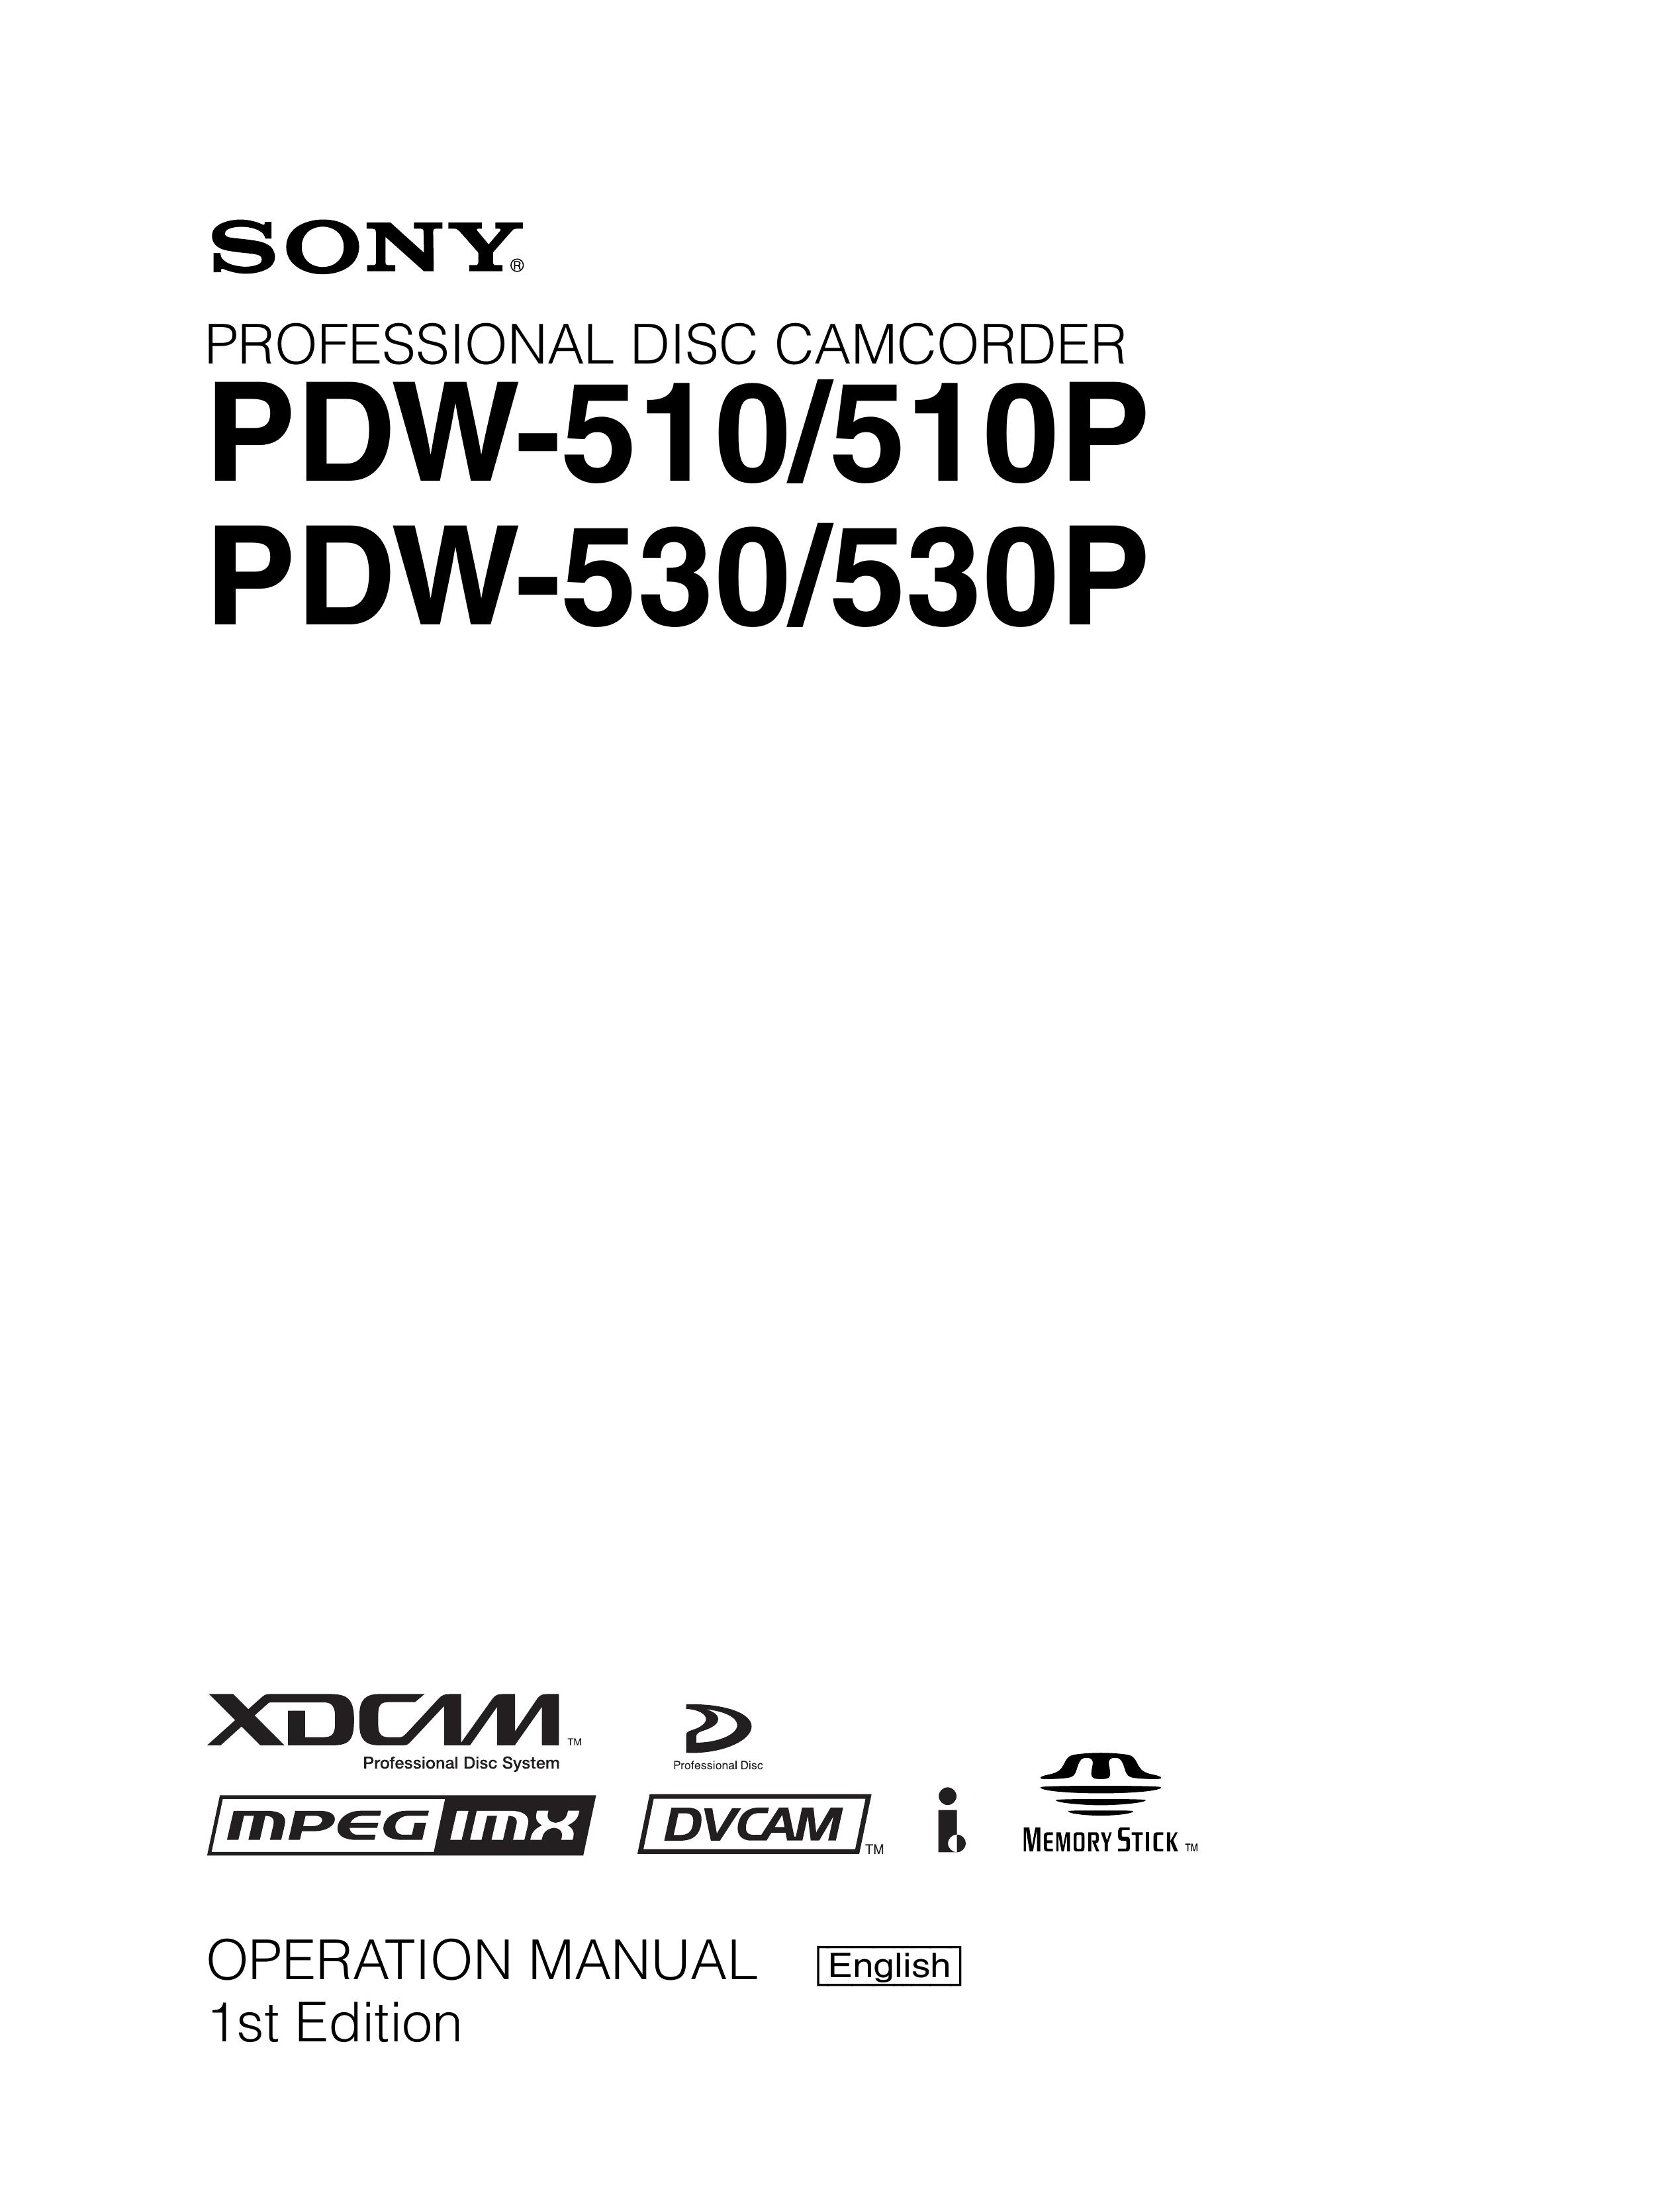 Sony Ericsson PDW-530 Camcorder User Manual